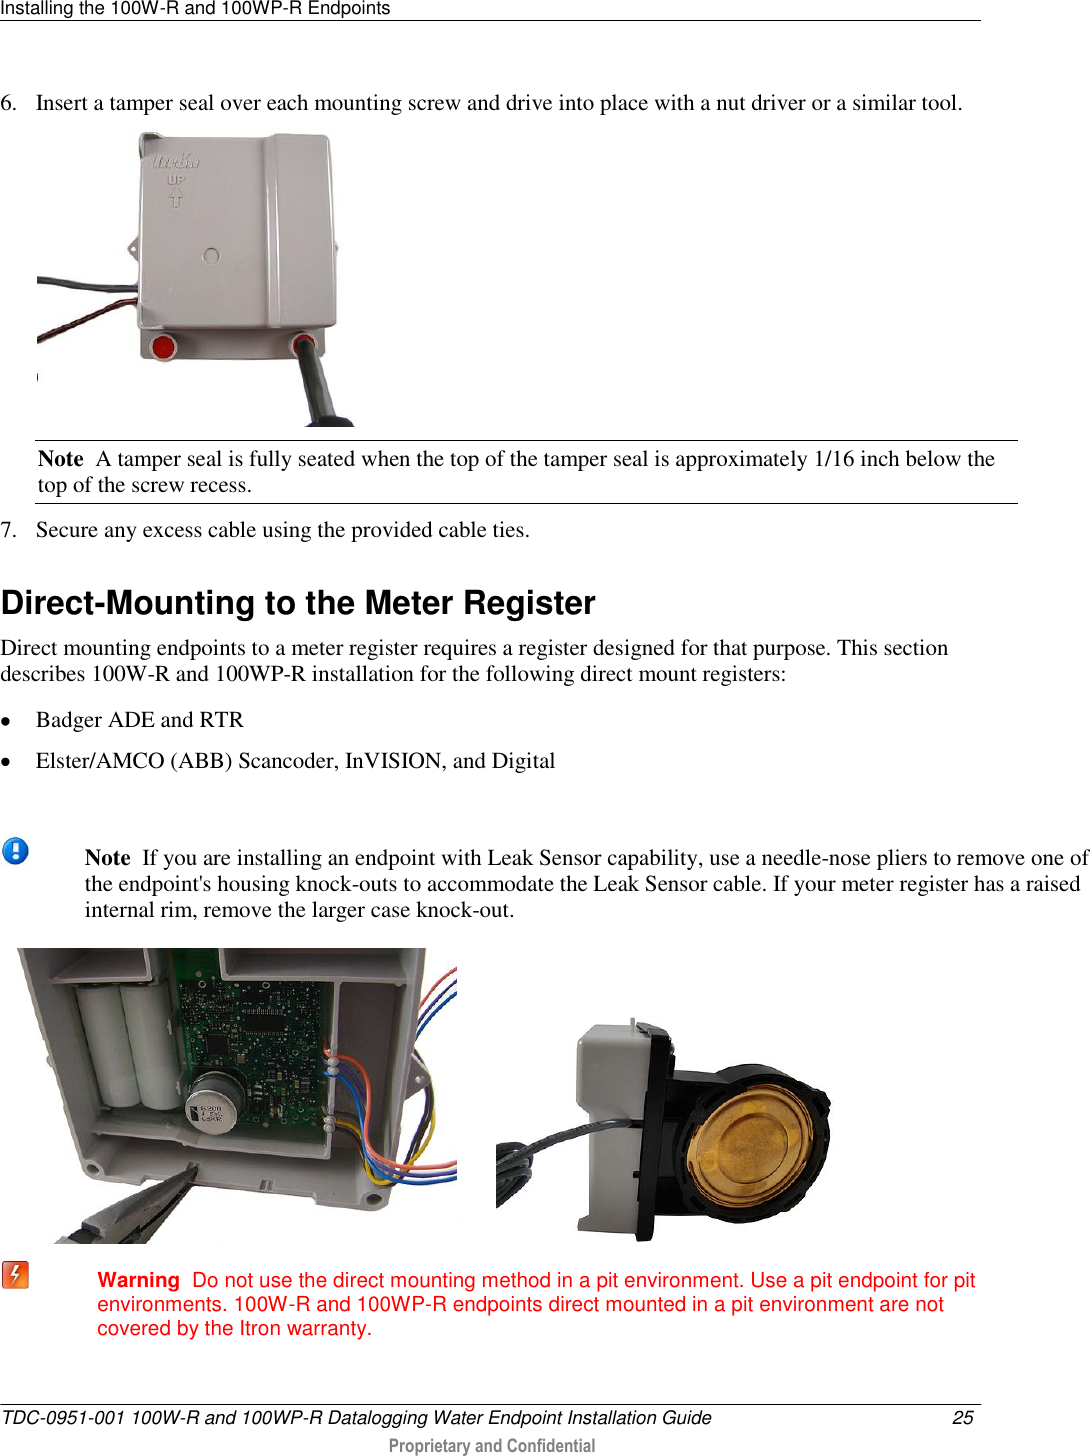 Installing the 100W-R and 100WP-R Endpoints   TDC-0951-001 100W-R and 100WP-R Datalogging Water Endpoint Installation Guide  25   Proprietary and Confidential     6. Insert a tamper seal over each mounting screw and drive into place with a nut driver or a similar tool.  Note  A tamper seal is fully seated when the top of the tamper seal is approximately 1/16 inch below the top of the screw recess. 7. Secure any excess cable using the provided cable ties.   Direct-Mounting to the Meter Register Direct mounting endpoints to a meter register requires a register designed for that purpose. This section describes 100W-R and 100WP-R installation for the following direct mount registers:  Badger ADE and RTR  Elster/AMCO (ABB) Scancoder, InVISION, and Digital   Note  If you are installing an endpoint with Leak Sensor capability, use a needle-nose pliers to remove one of the endpoint&apos;s housing knock-outs to accommodate the Leak Sensor cable. If your meter register has a raised internal rim, remove the larger case knock-out.              Warning  Do not use the direct mounting method in a pit environment. Use a pit endpoint for pit environments. 100W-R and 100WP-R endpoints direct mounted in a pit environment are not covered by the Itron warranty.  